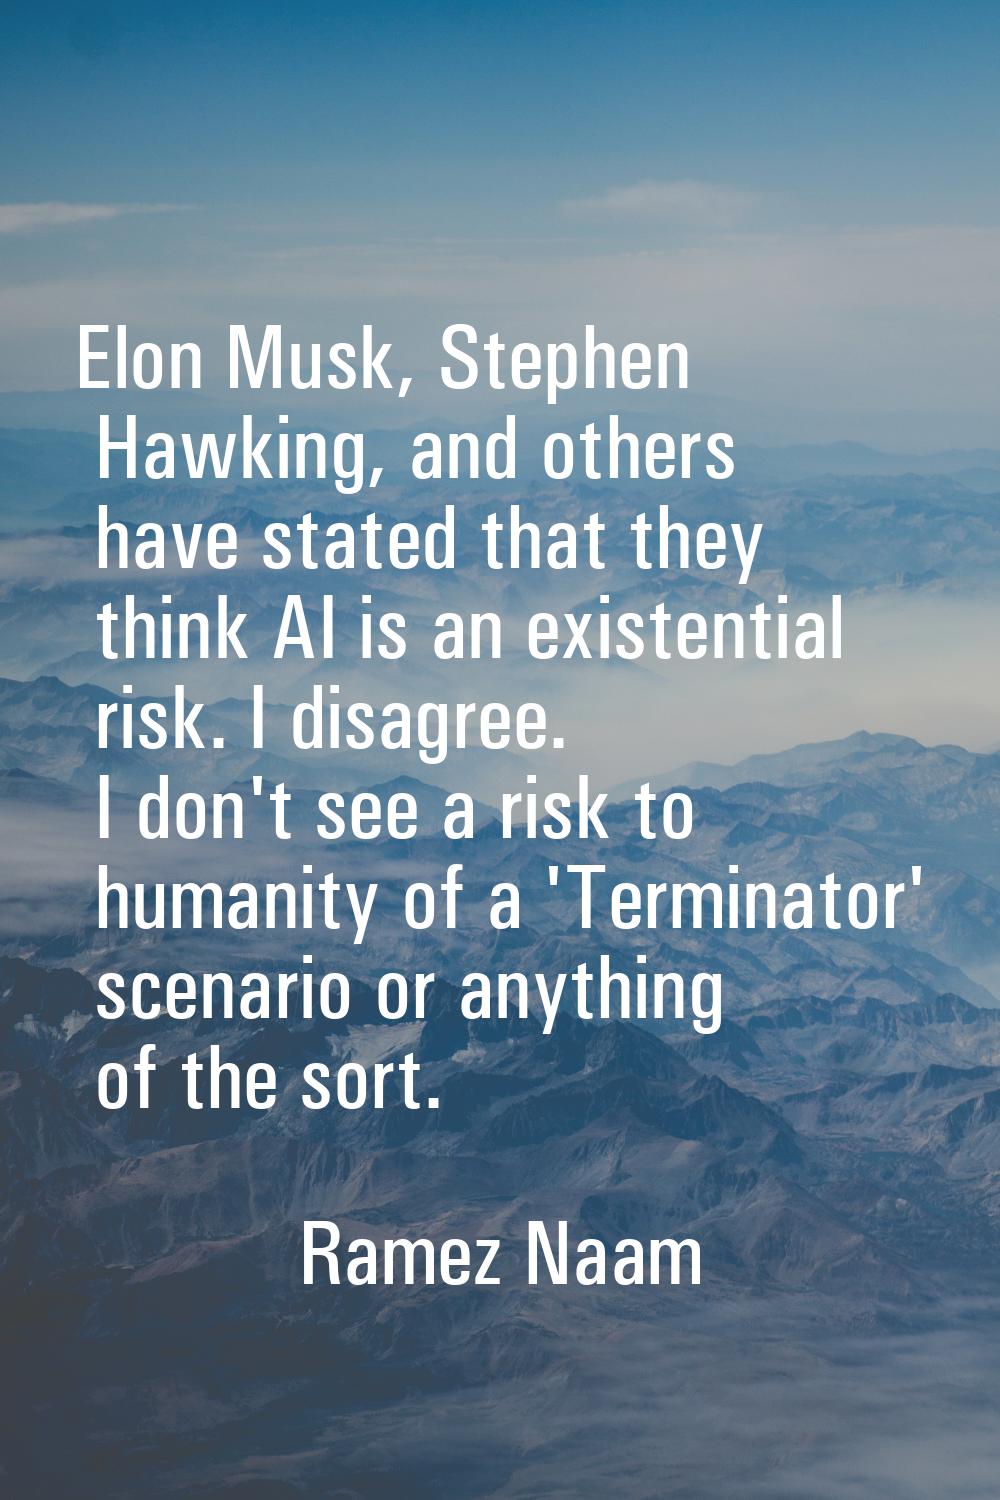 Elon Musk, Stephen Hawking, and others have stated that they think AI is an existential risk. I dis